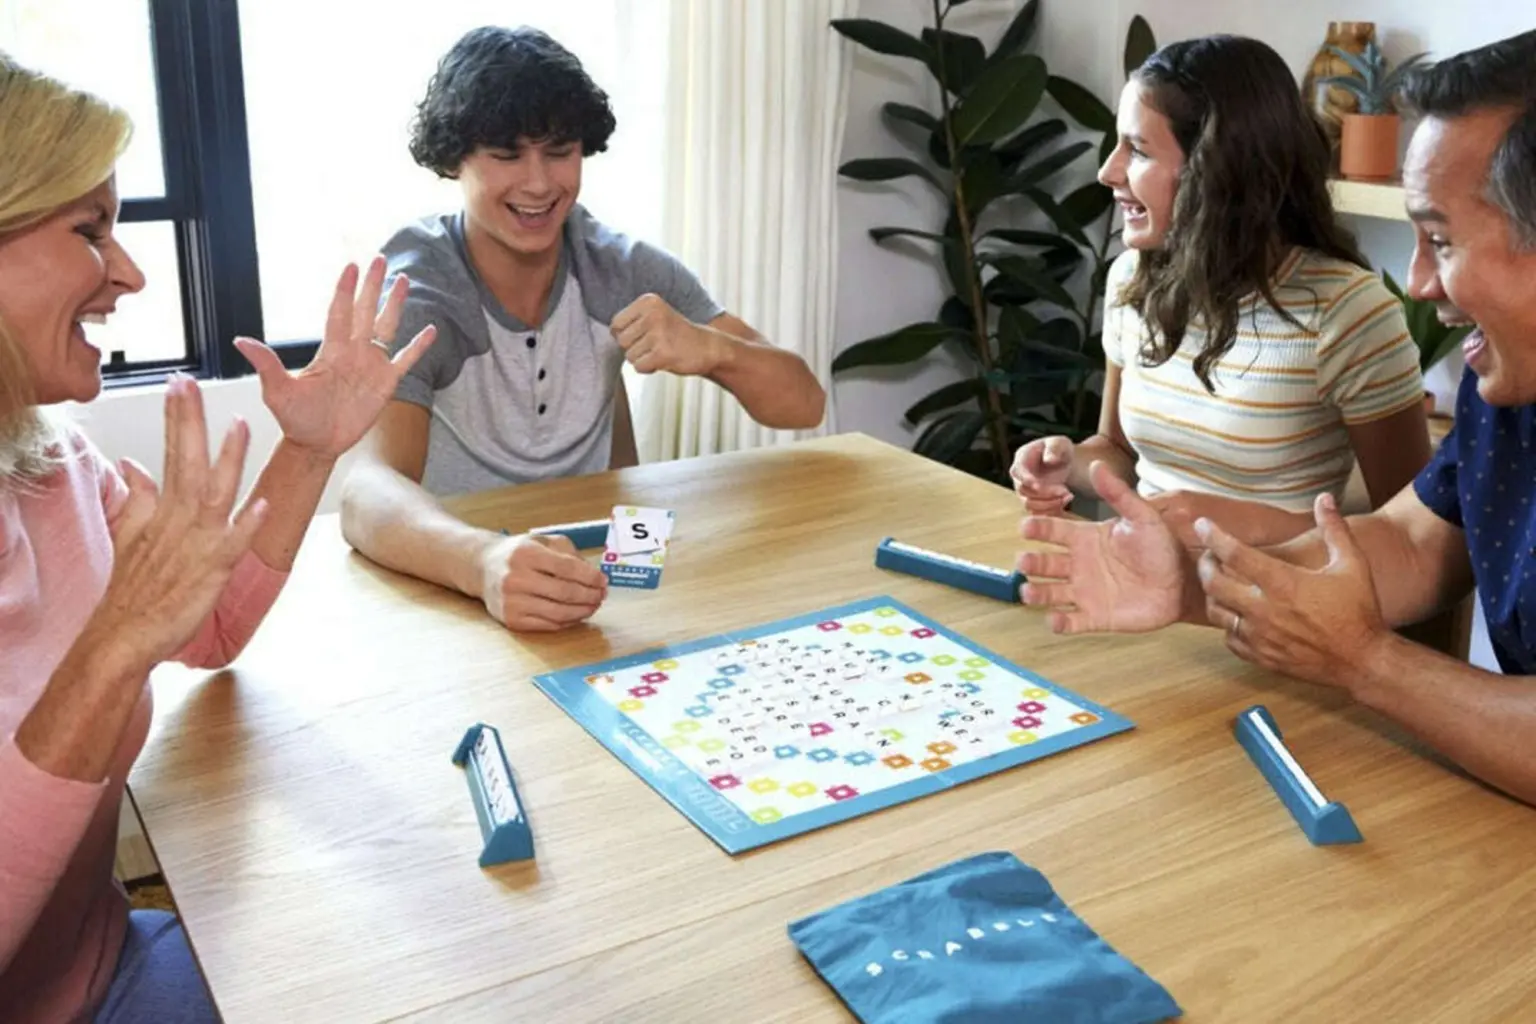 Scrabble Makes Historic Change To Make Game More ‘Inclusive’ For Gen Z